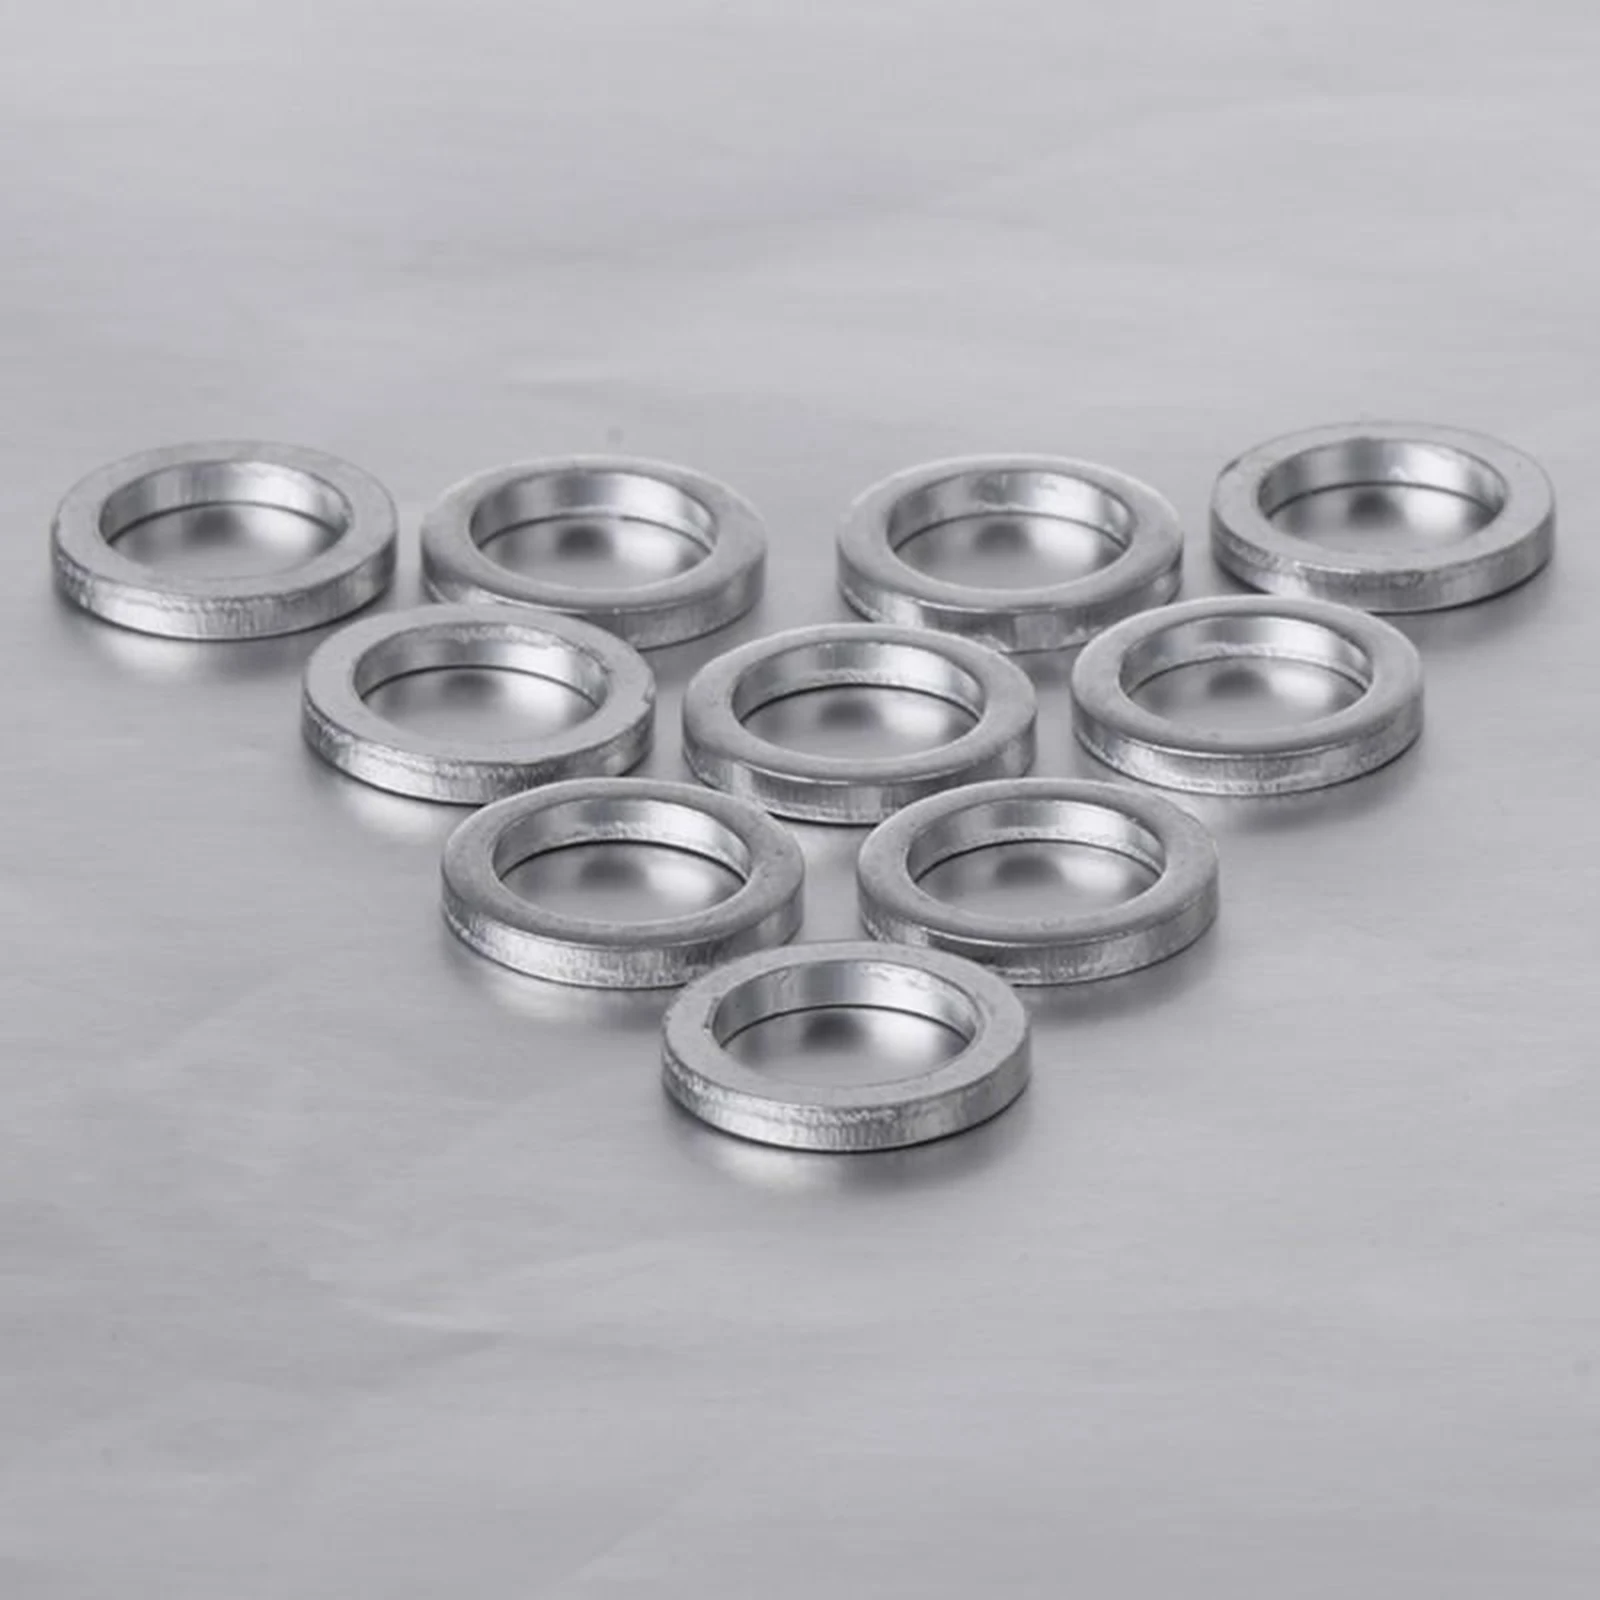 10pcs Silver 1mm Aluminum Spacer Shim for Bicycle Chainring  Screws